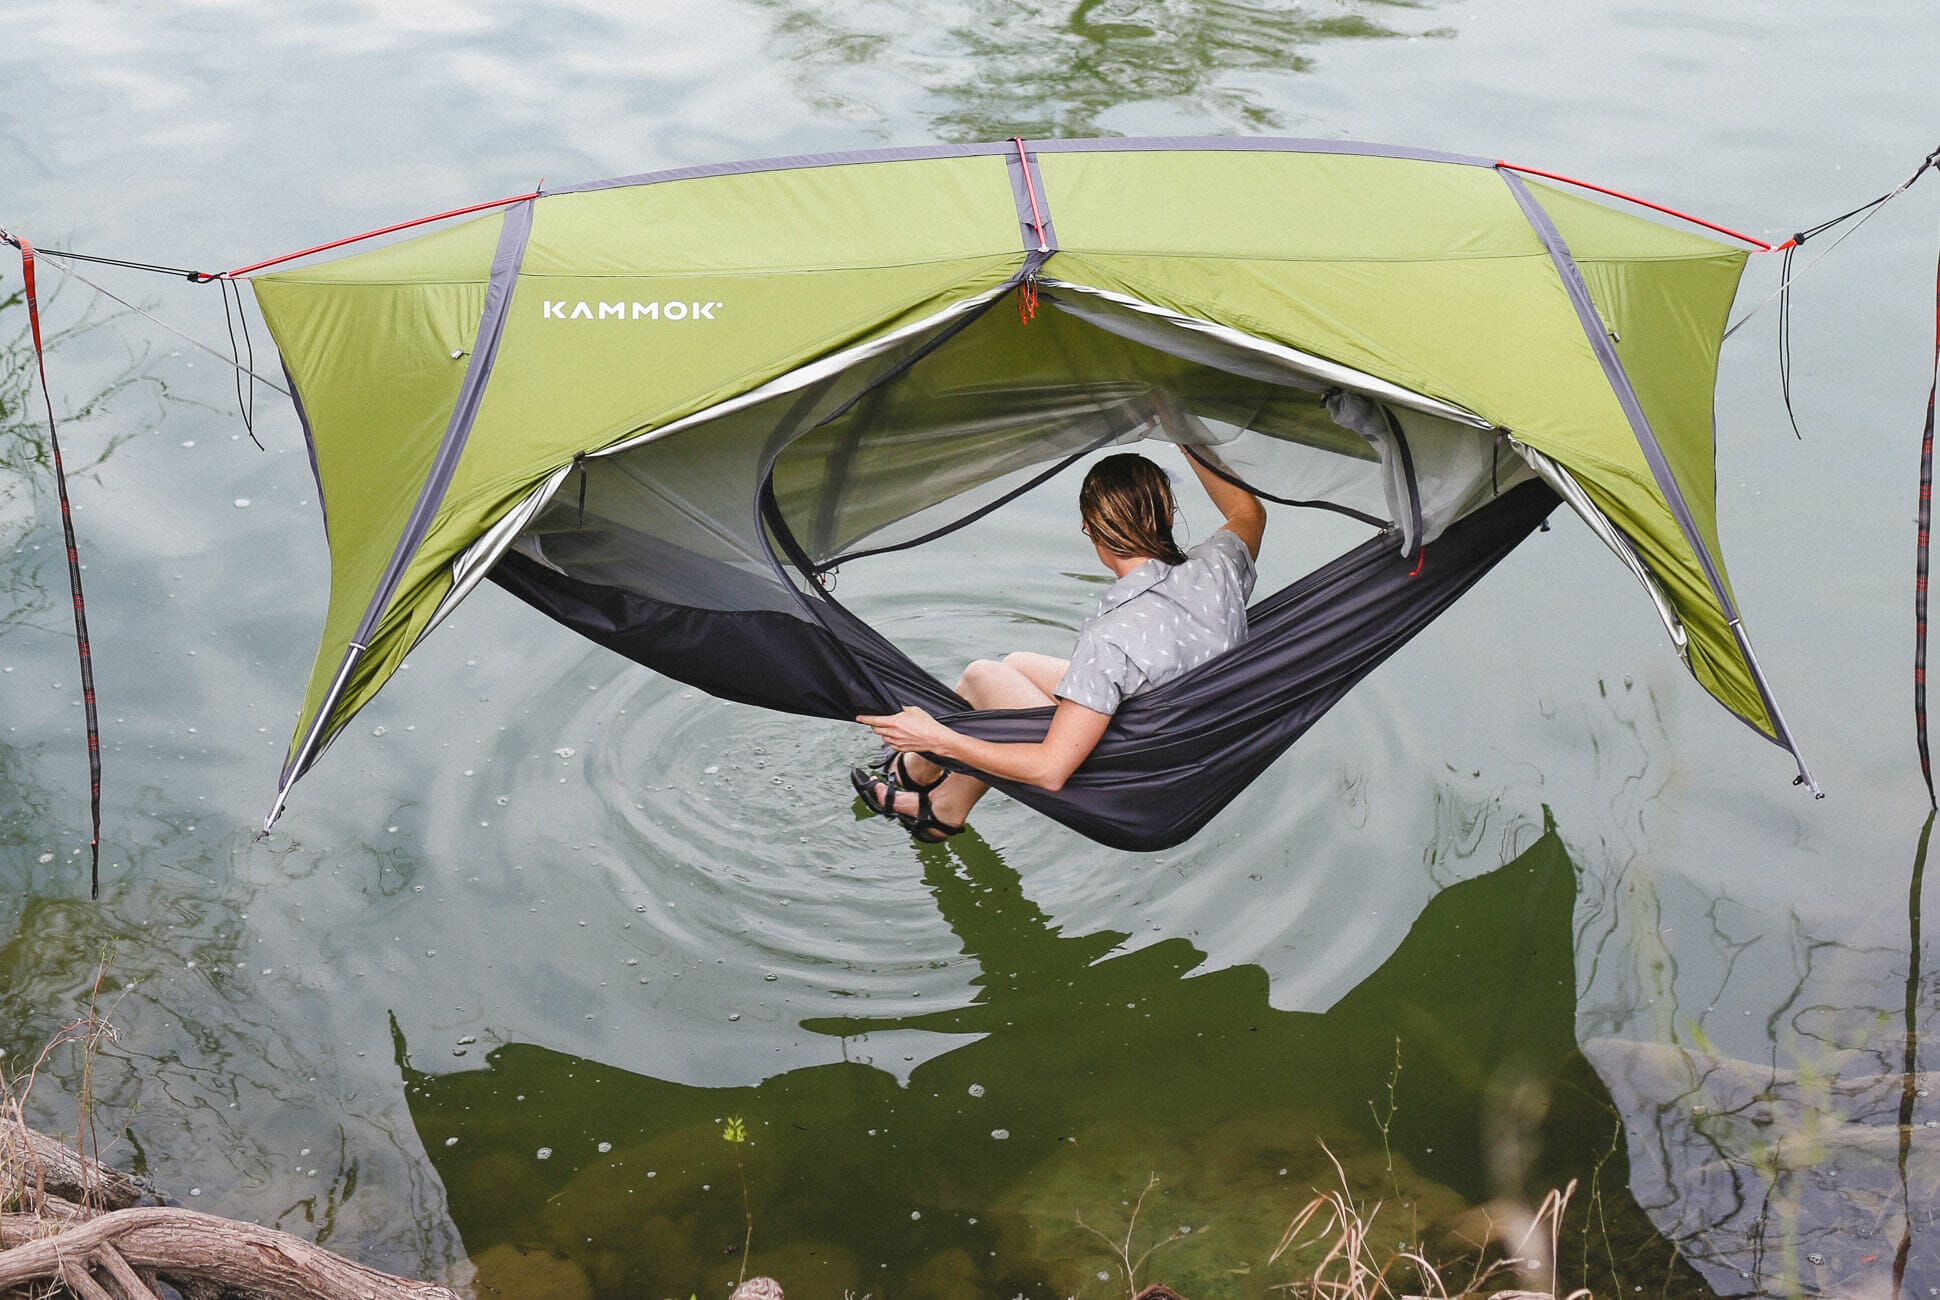 This New Tent Makes Sleeping in the Woods More Fun